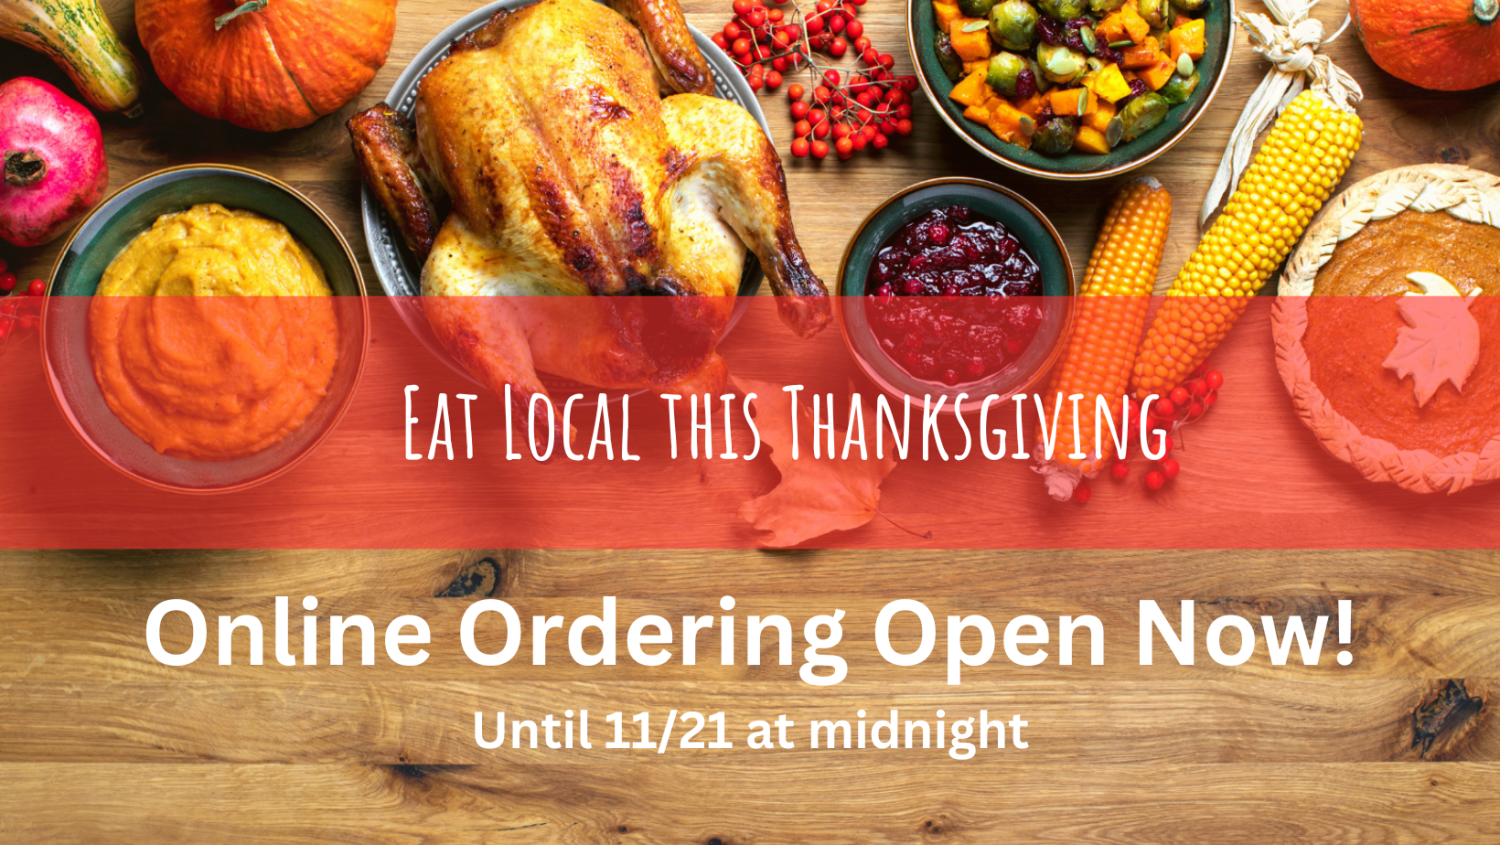 Next Happening: Order from the FarmStand for Thanksgiving!